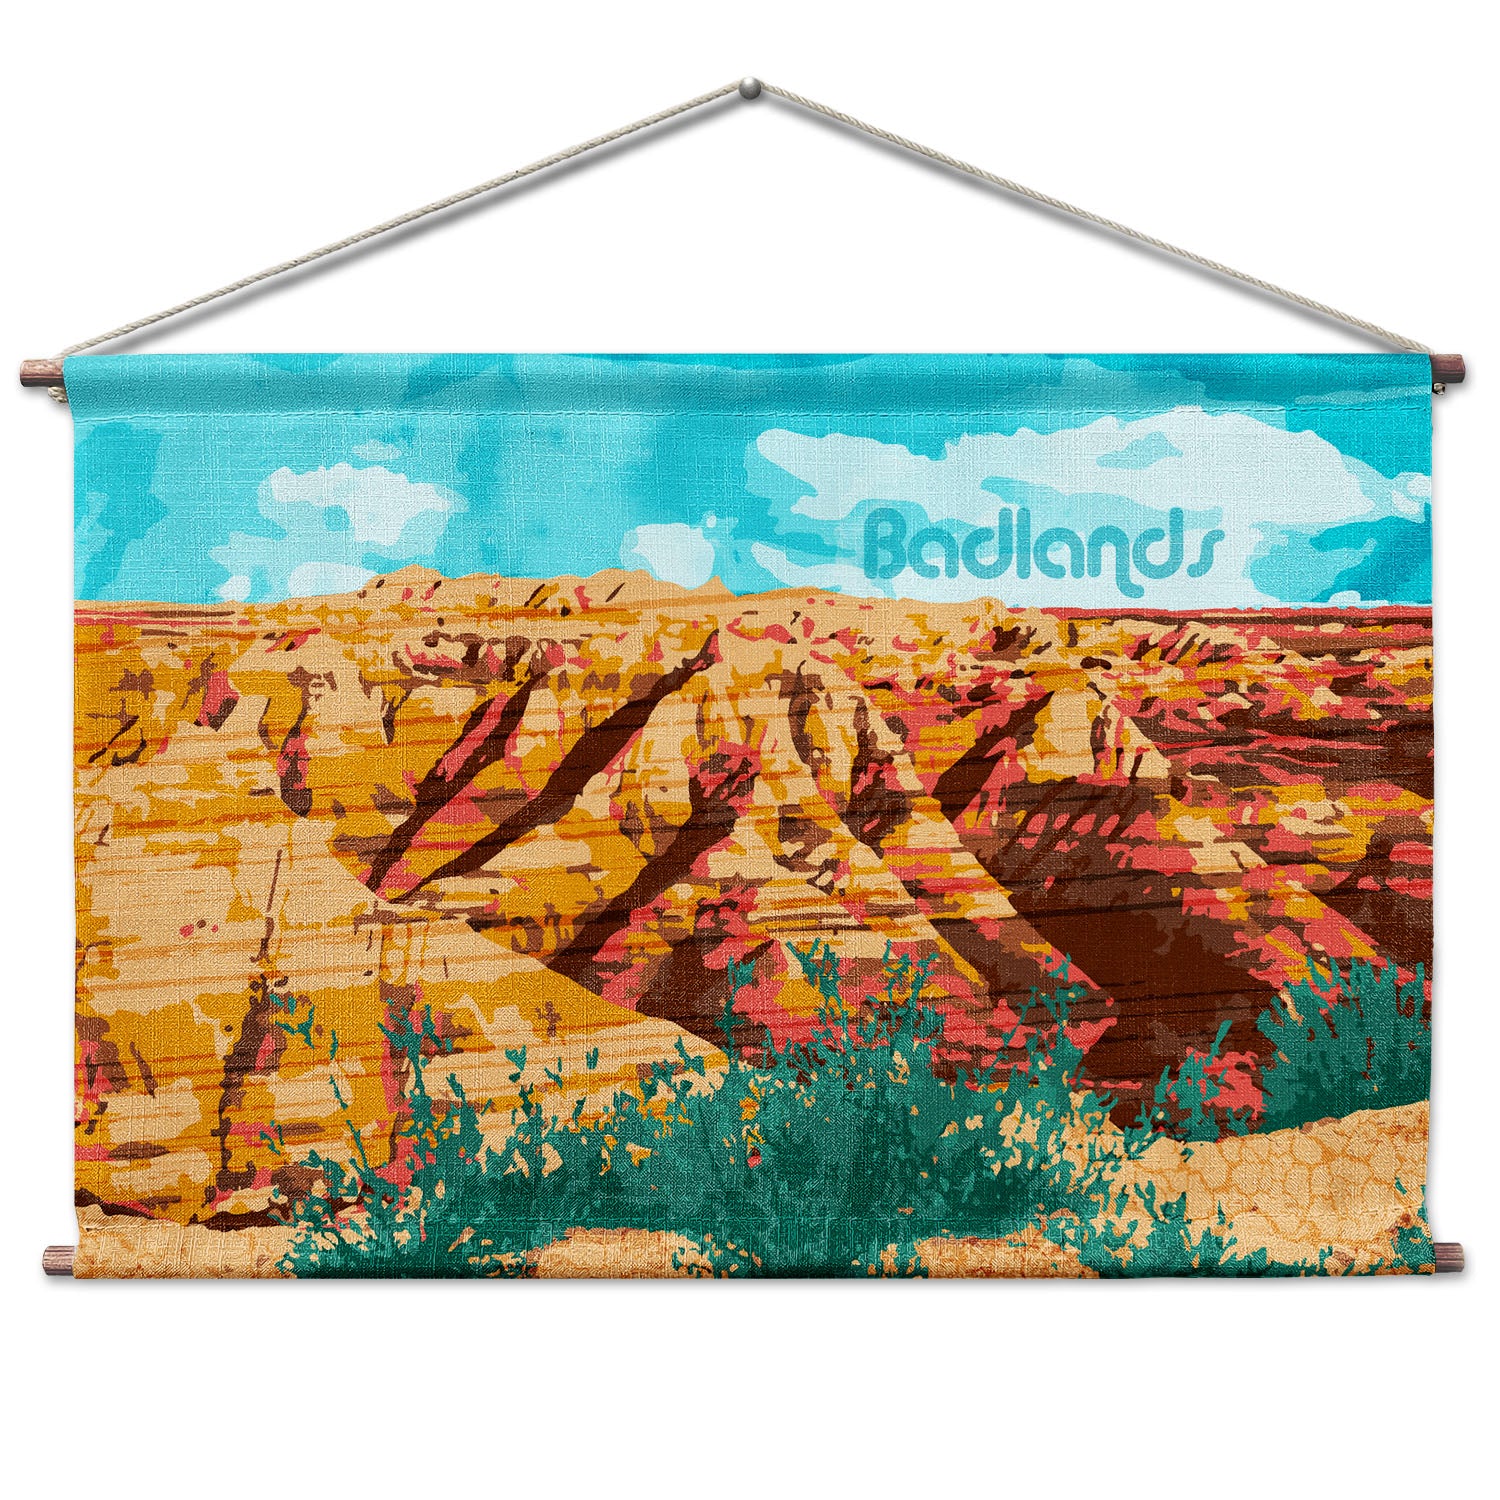 Badlands National Park Abstract Landscape Wall Hanging - Walnut -  - Knotty Tie Co.